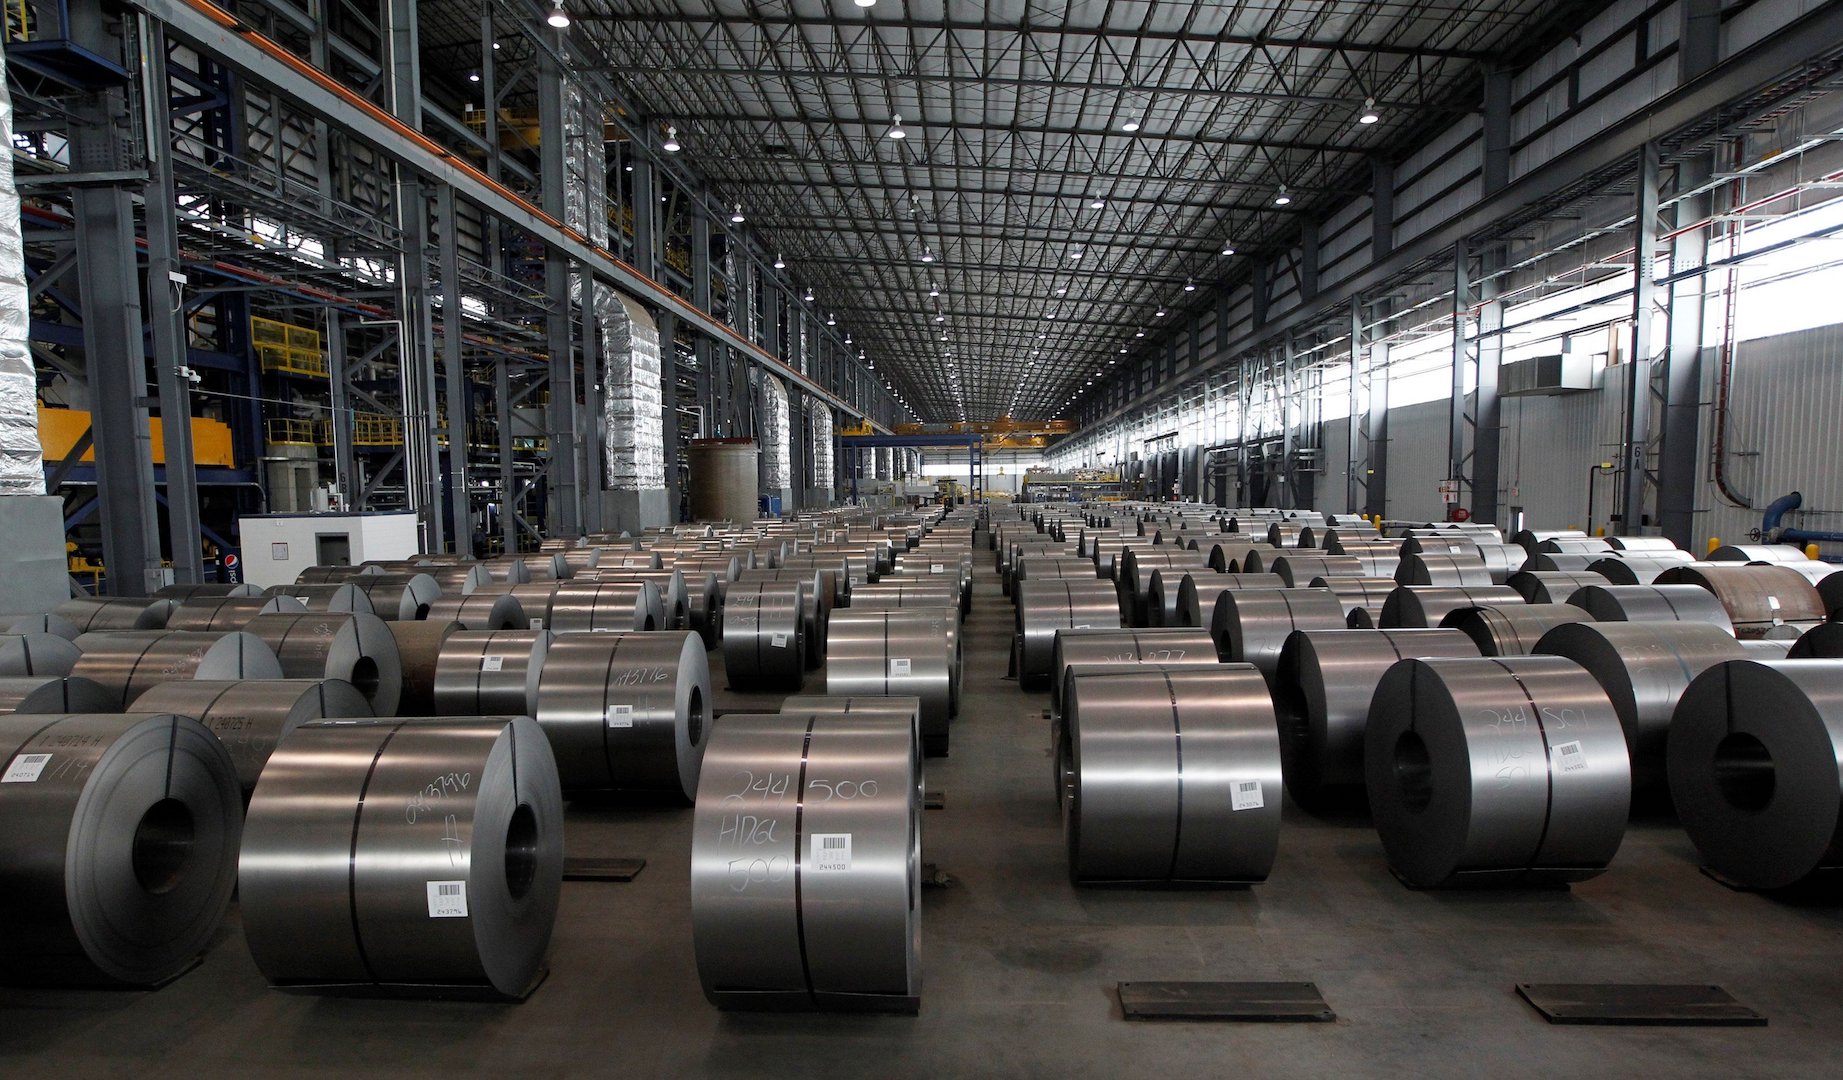 Brazil is the second largest exporter of steel to the US.